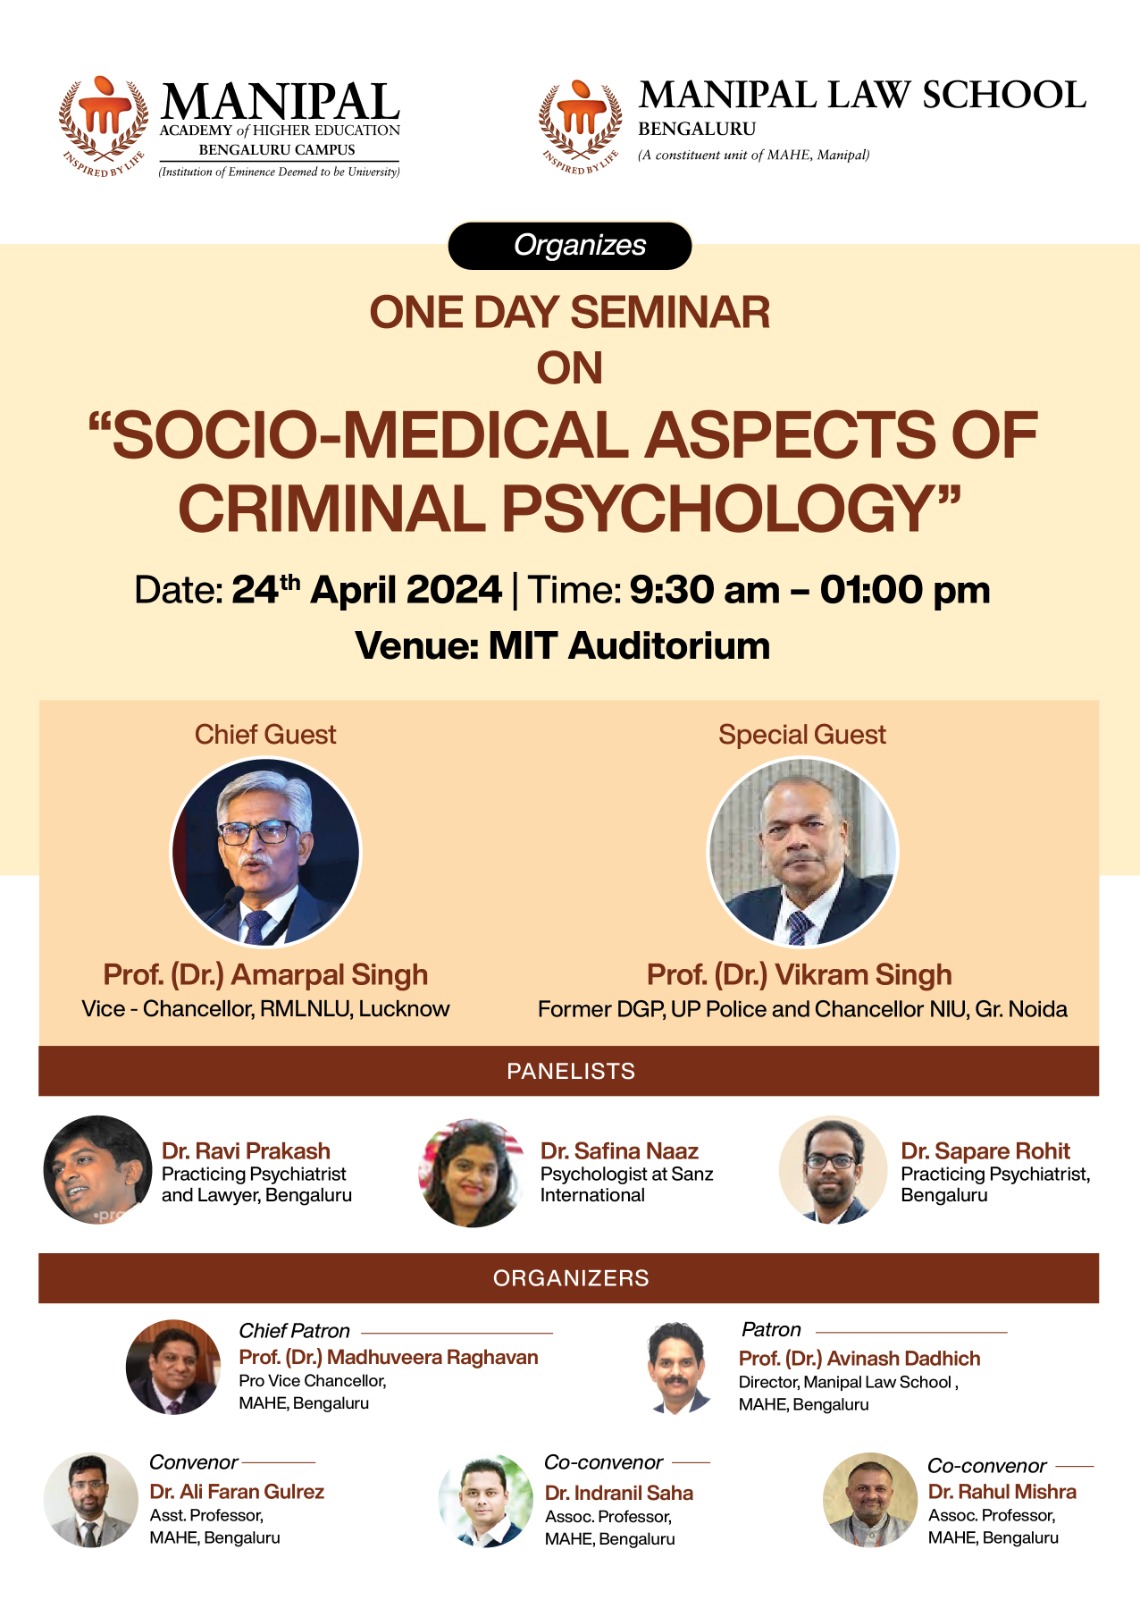 ONE DAY PANEL DISCUSSION ON SOCIO-MEDICAL ASPECTS OF CRIMINAL PSYCHOLOGY